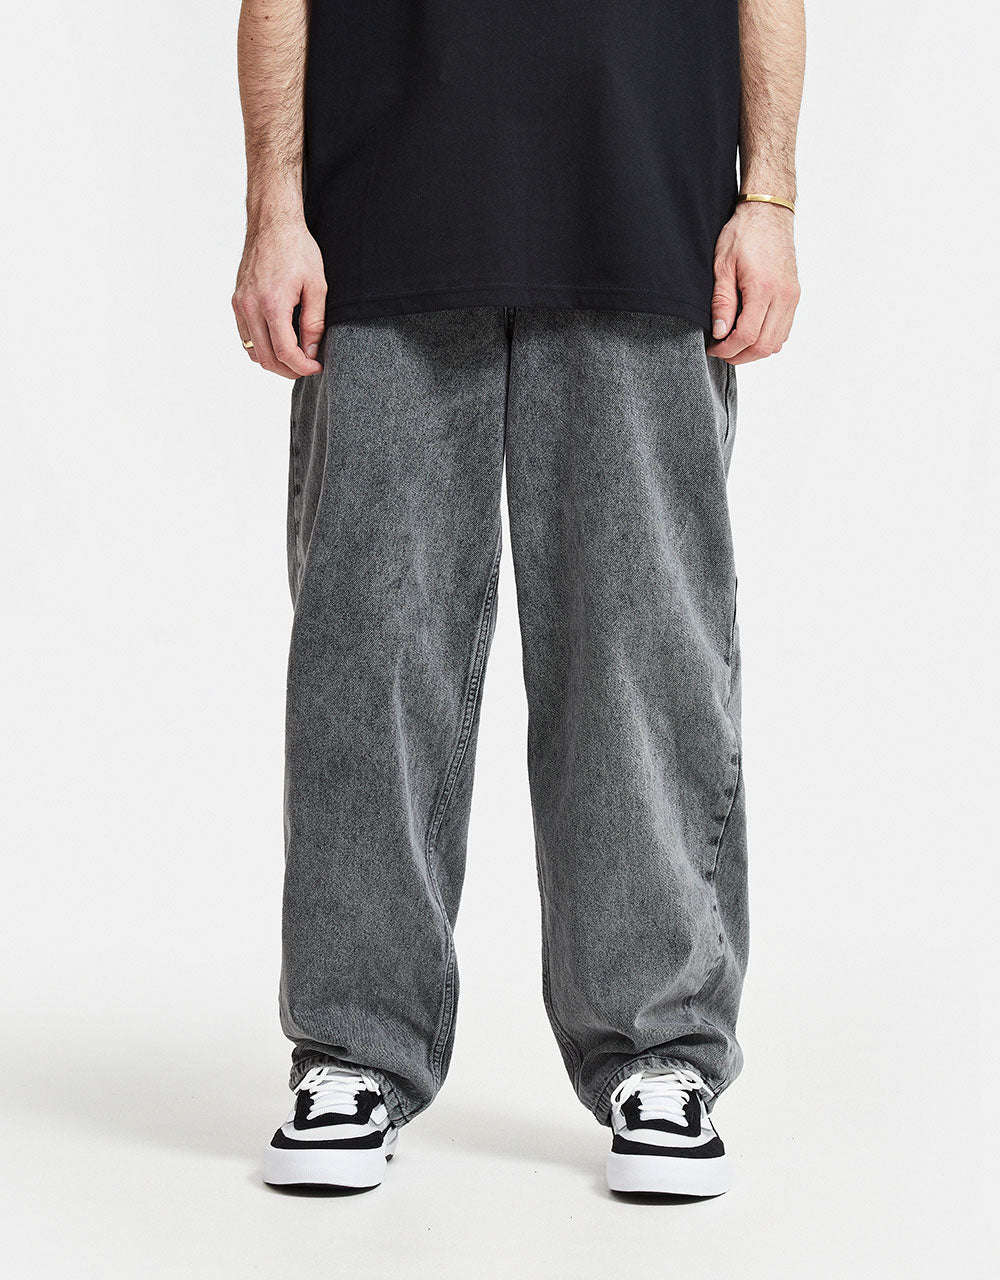 Route One Super Baggy Denim Jeans - Slate Grey